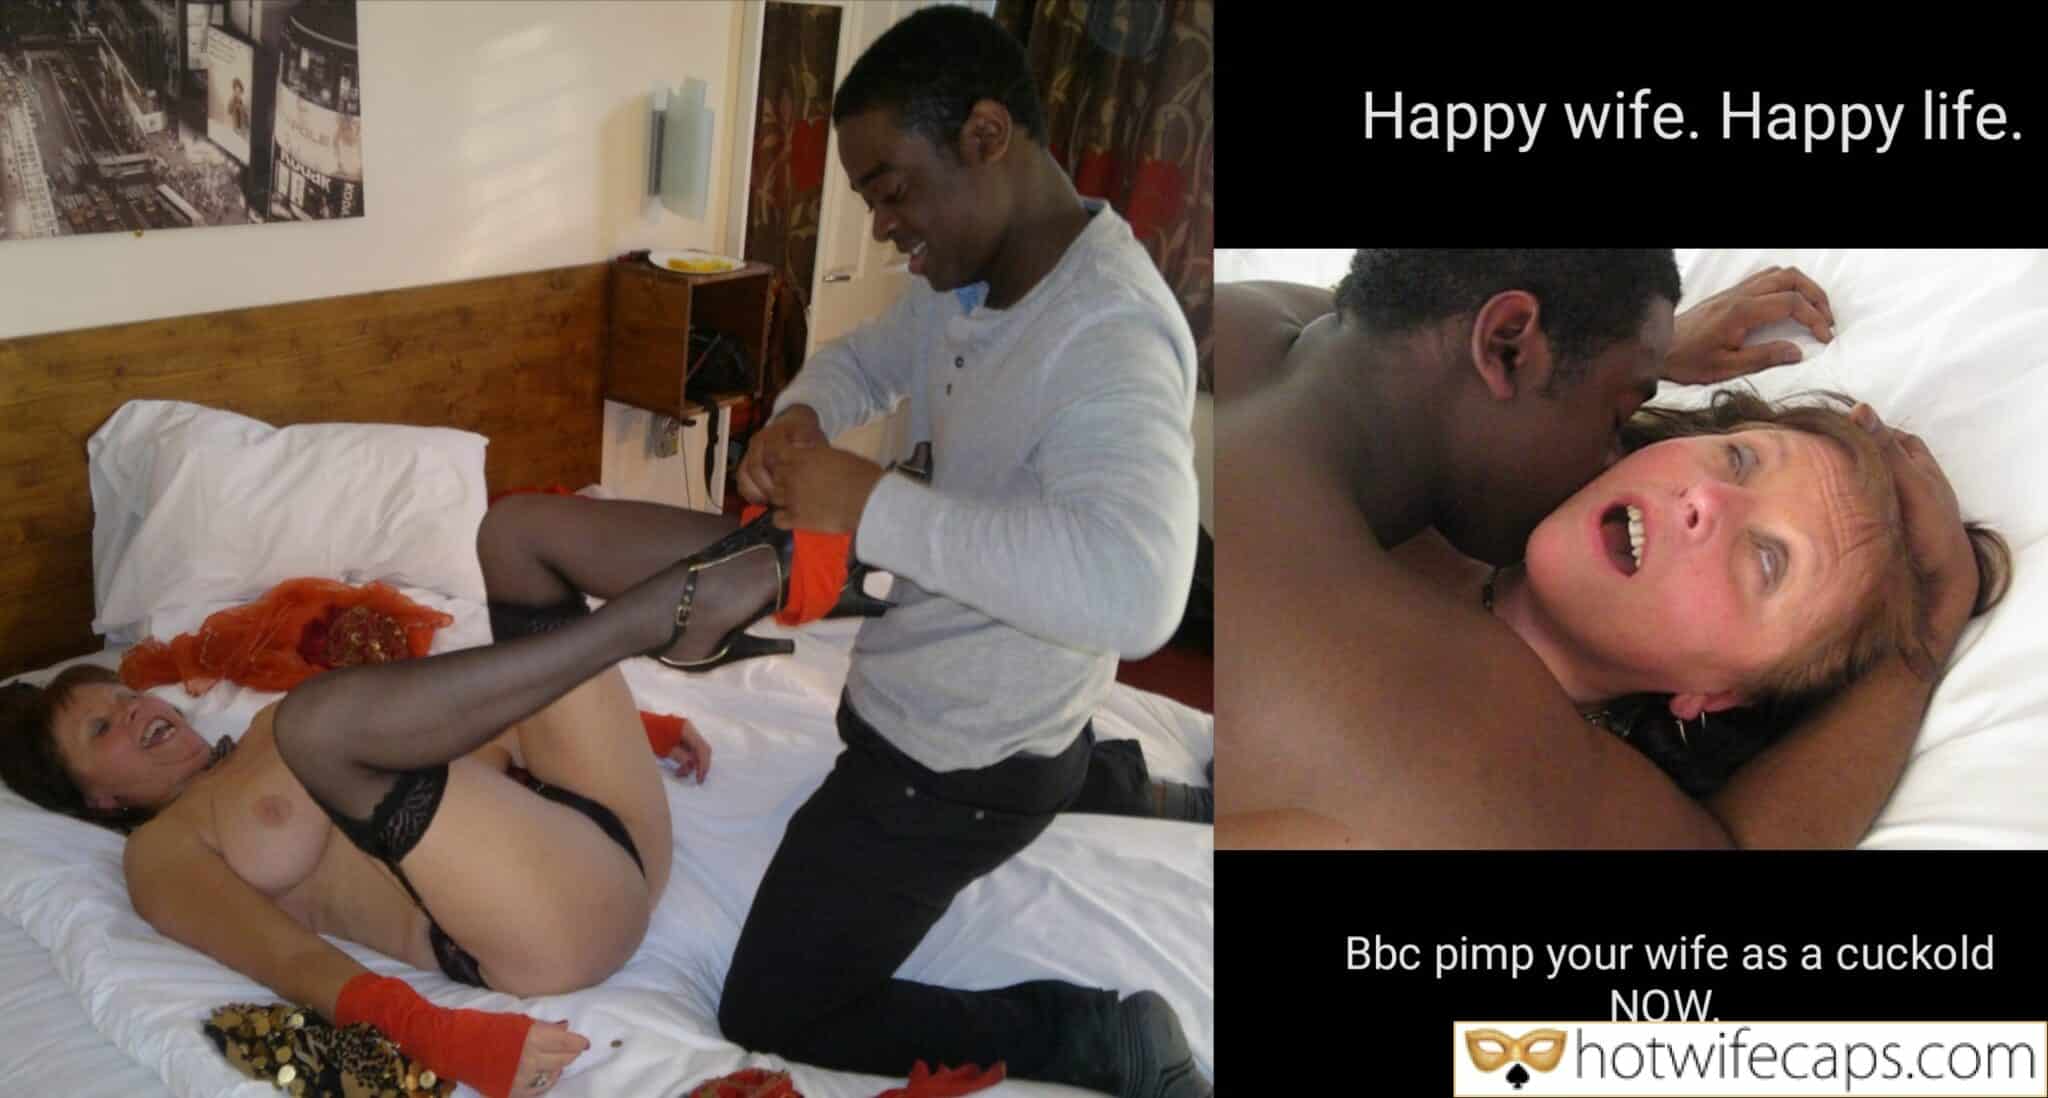 Wife Sharing Cum Slut BBC hotwife caption: Happy wife. Happy life. Bbc pimp your wife as a cuckold NOW. Mature Wife Happy With Younger BBC